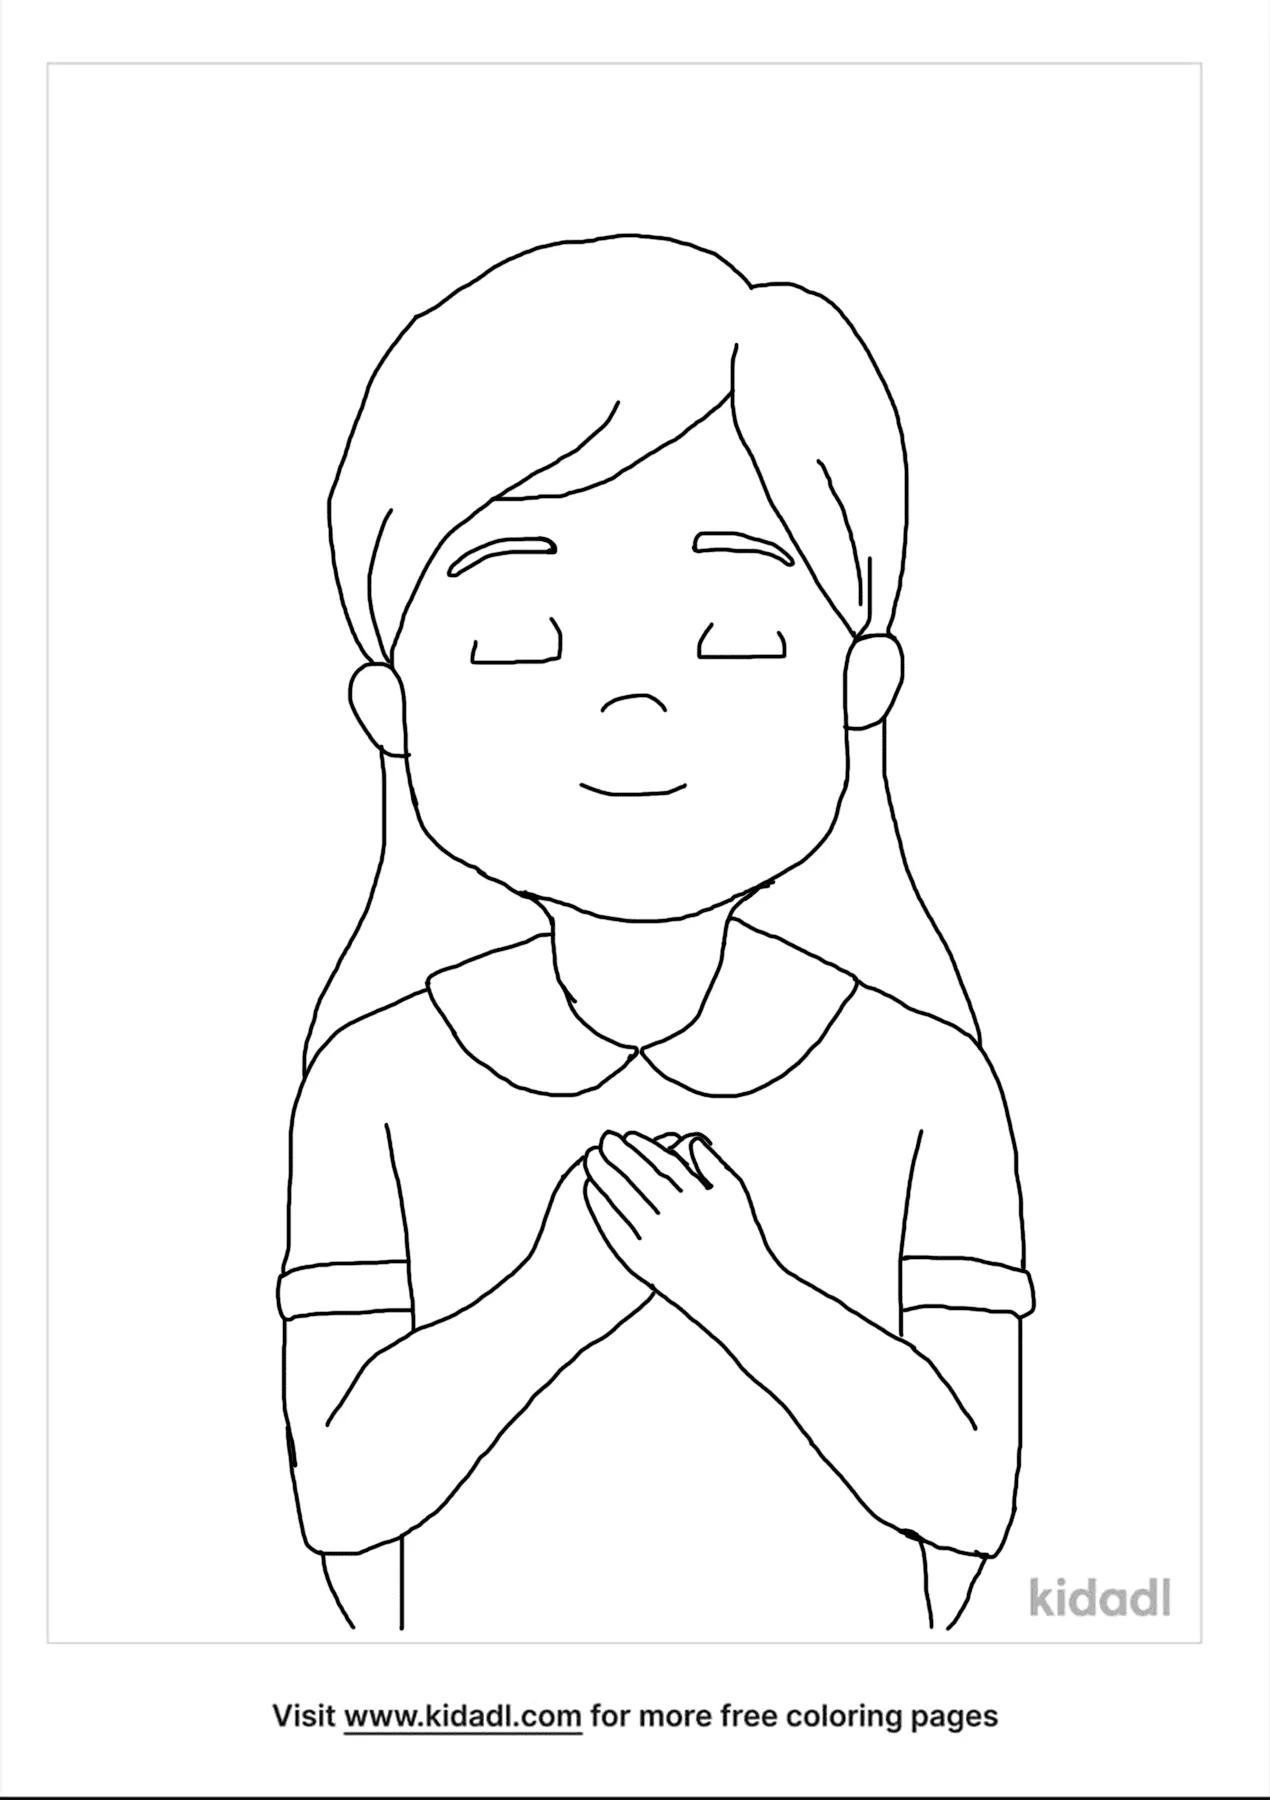 Free pledge of allegiance coloring page coloring page printables